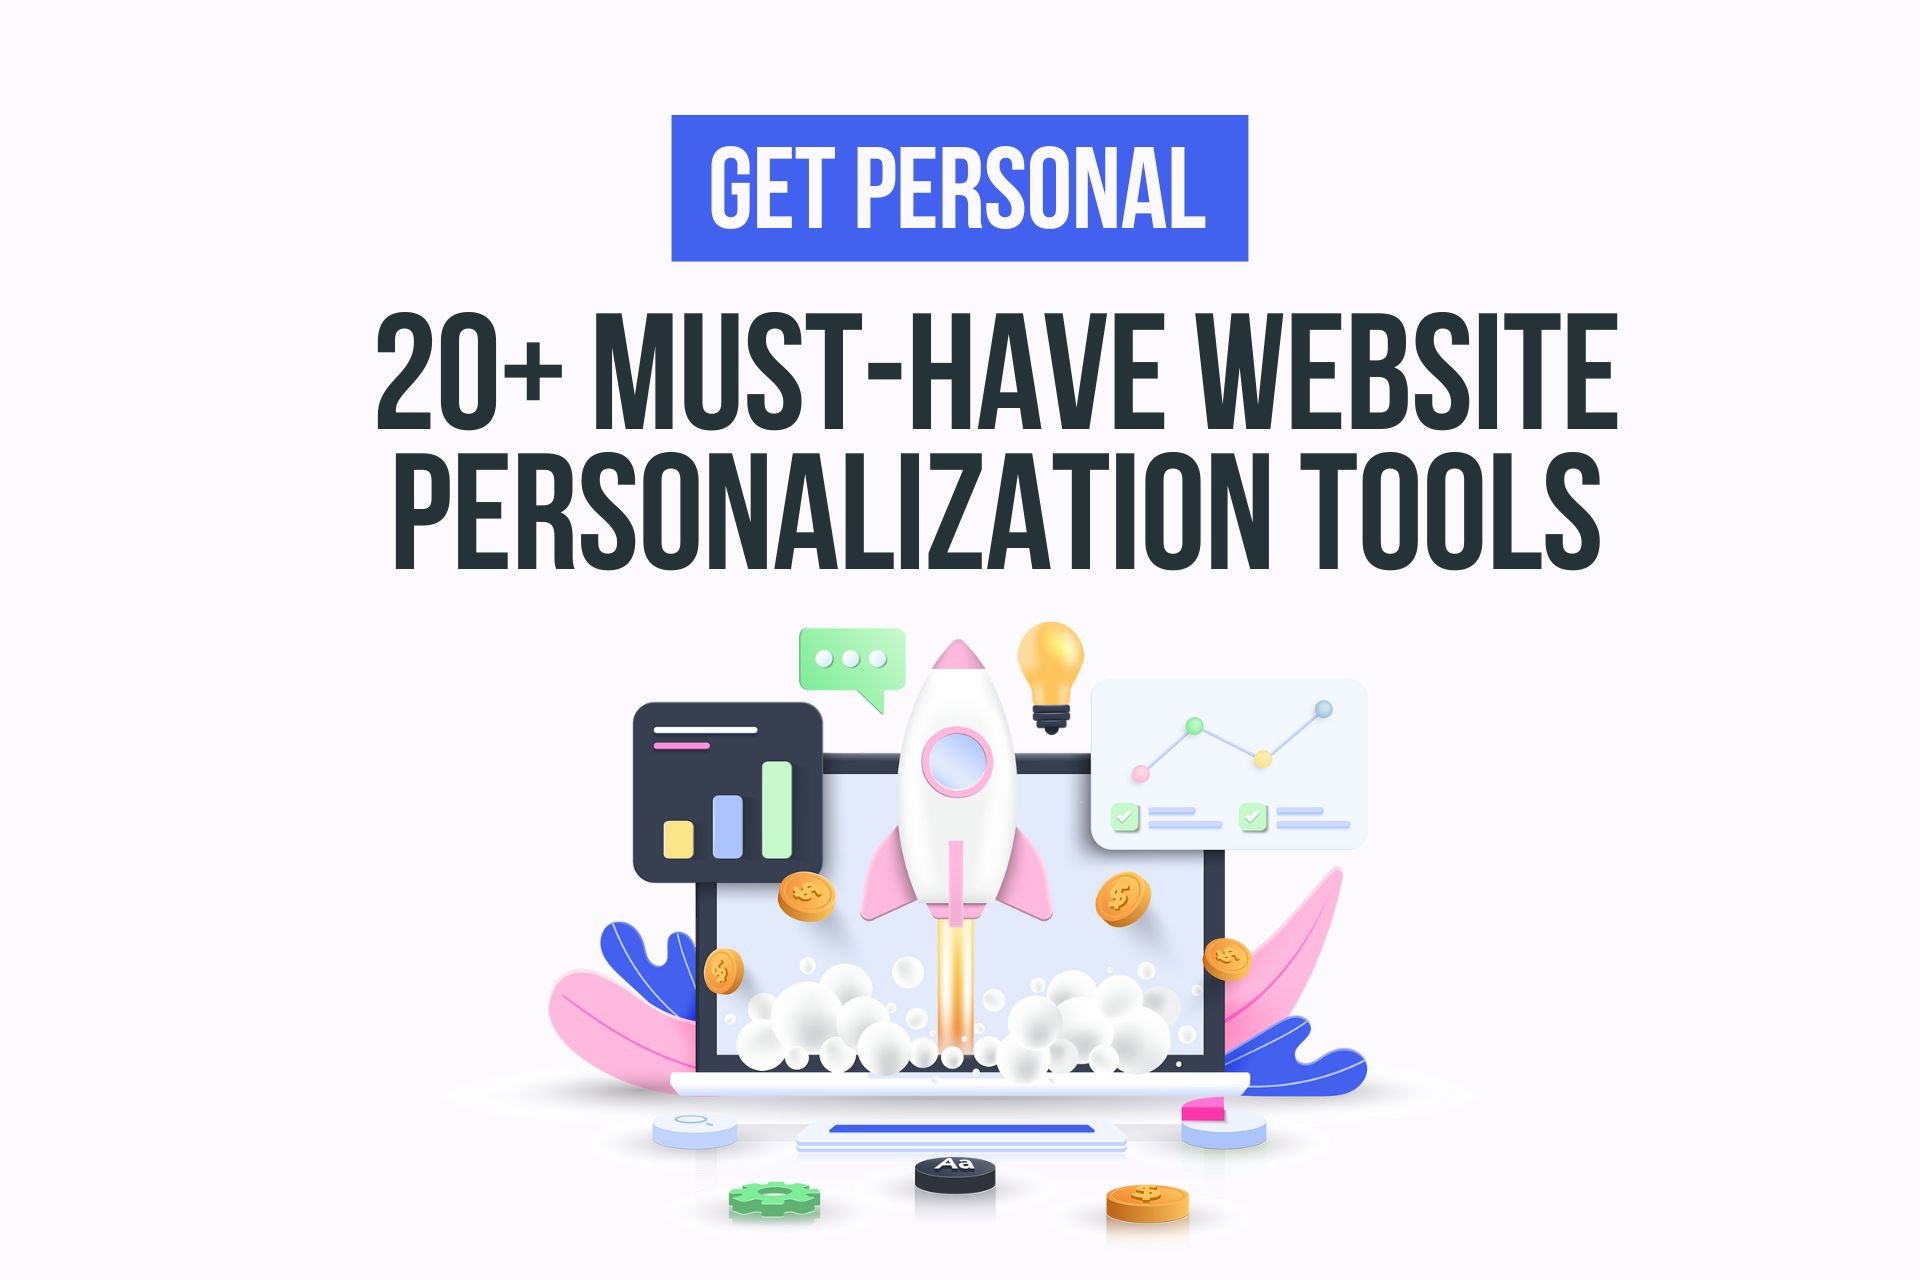 Get Personal: 20+ Must-Have Website Personalization Tools